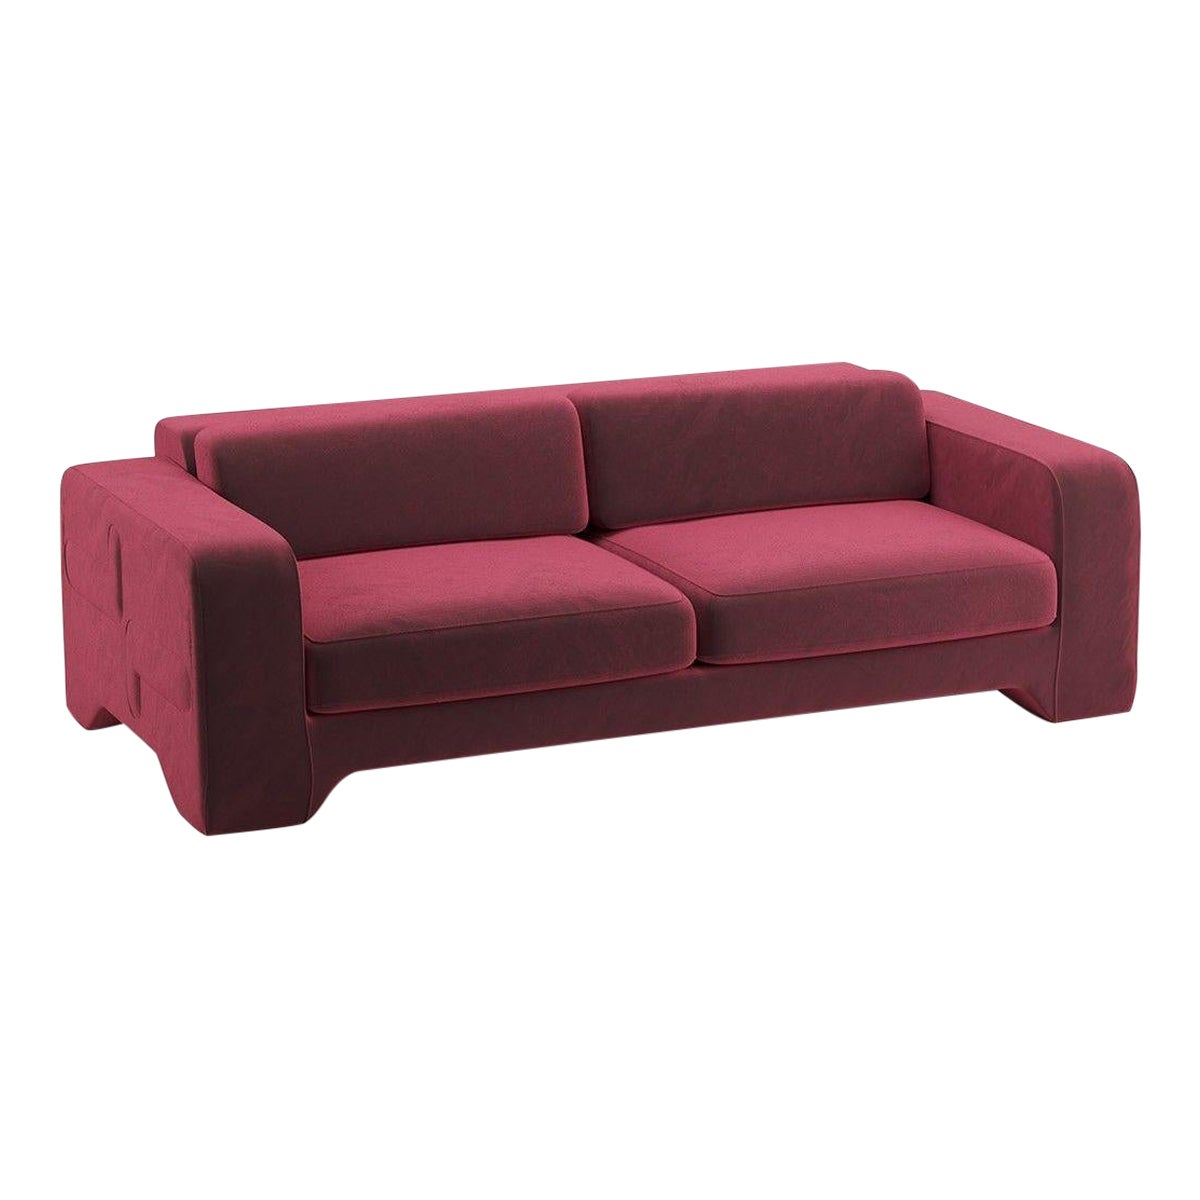 Popus Editions Giovanna 4 Seater Sofa in Red Como Velvet Upholstery